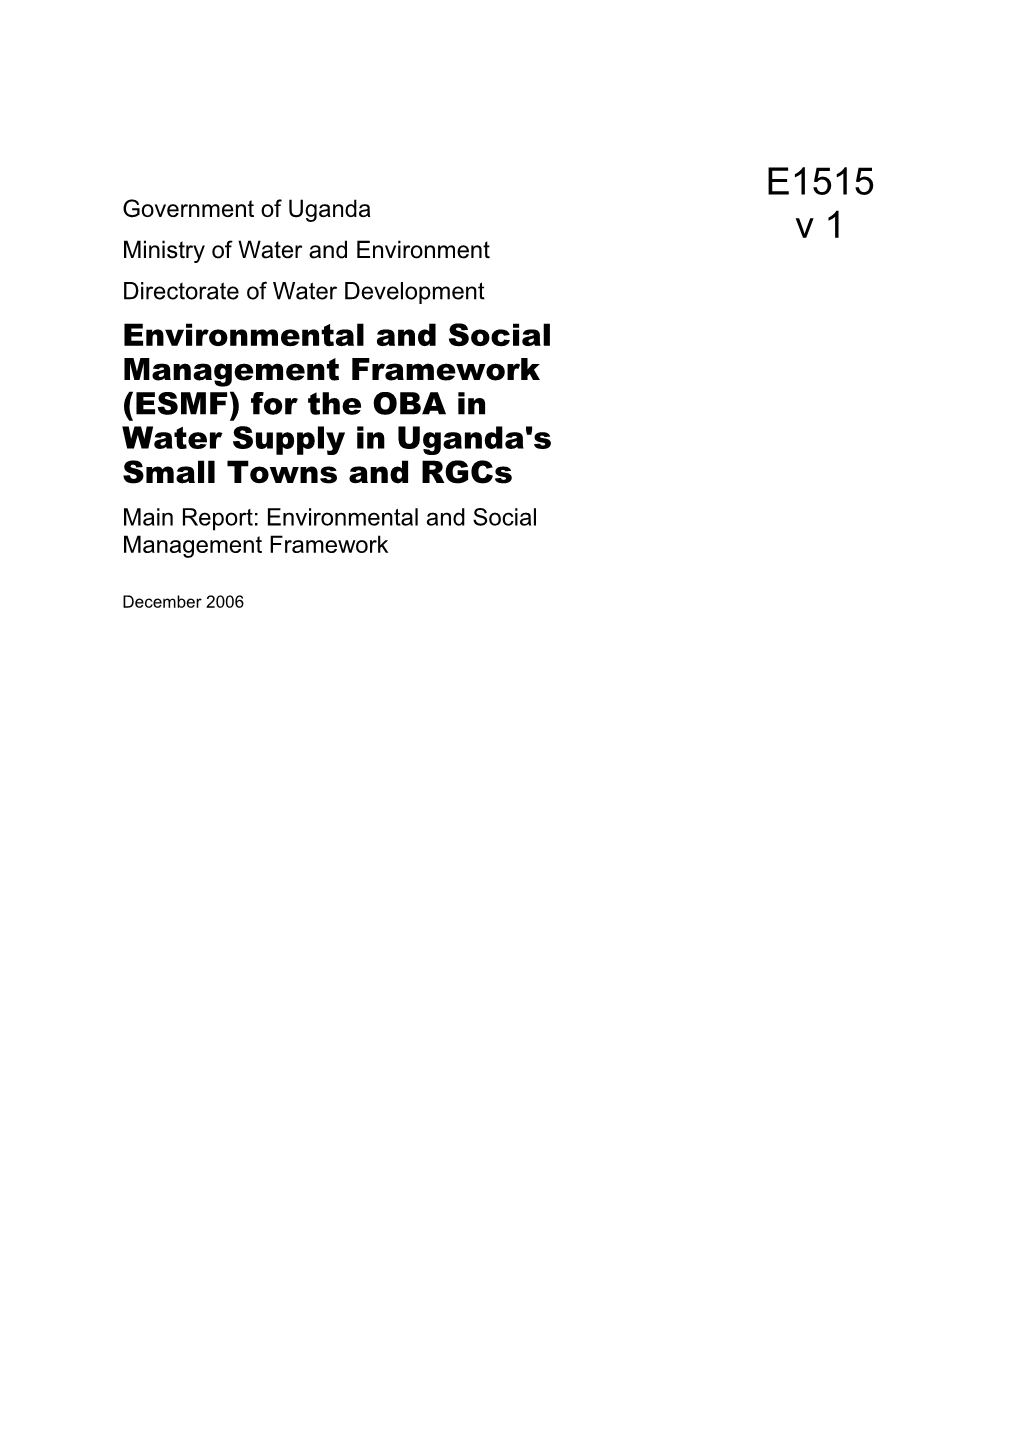 Environmental And Social Management Framework (ESMF) For The OBA In Water Supply In Uganda's Small Towns And Rgcs